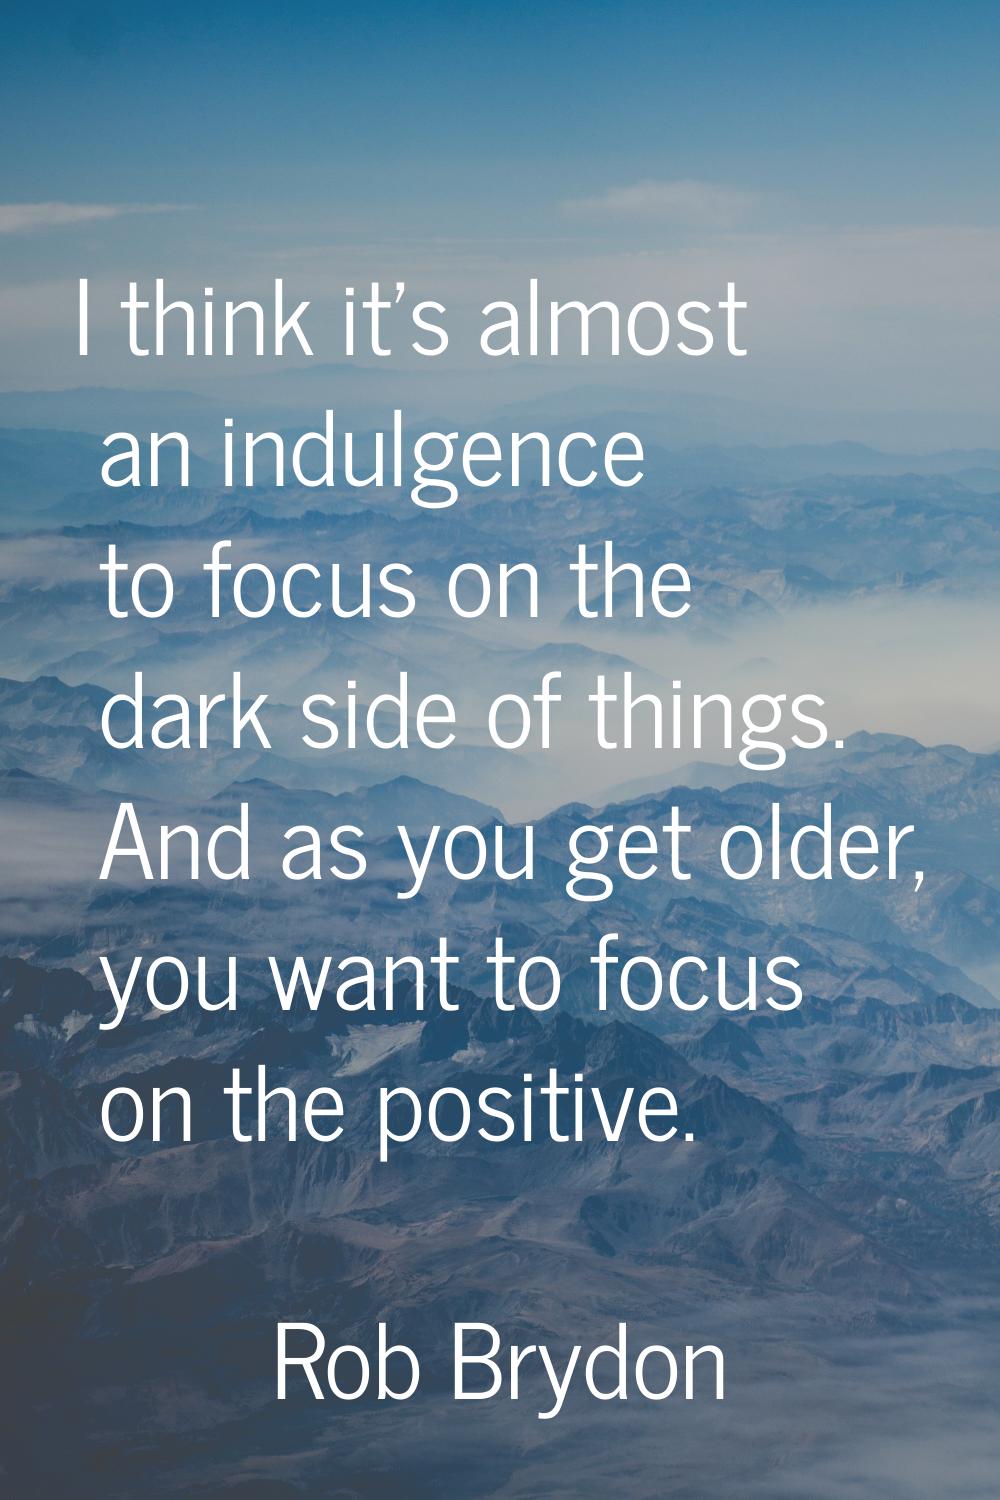 I think it's almost an indulgence to focus on the dark side of things. And as you get older, you wa